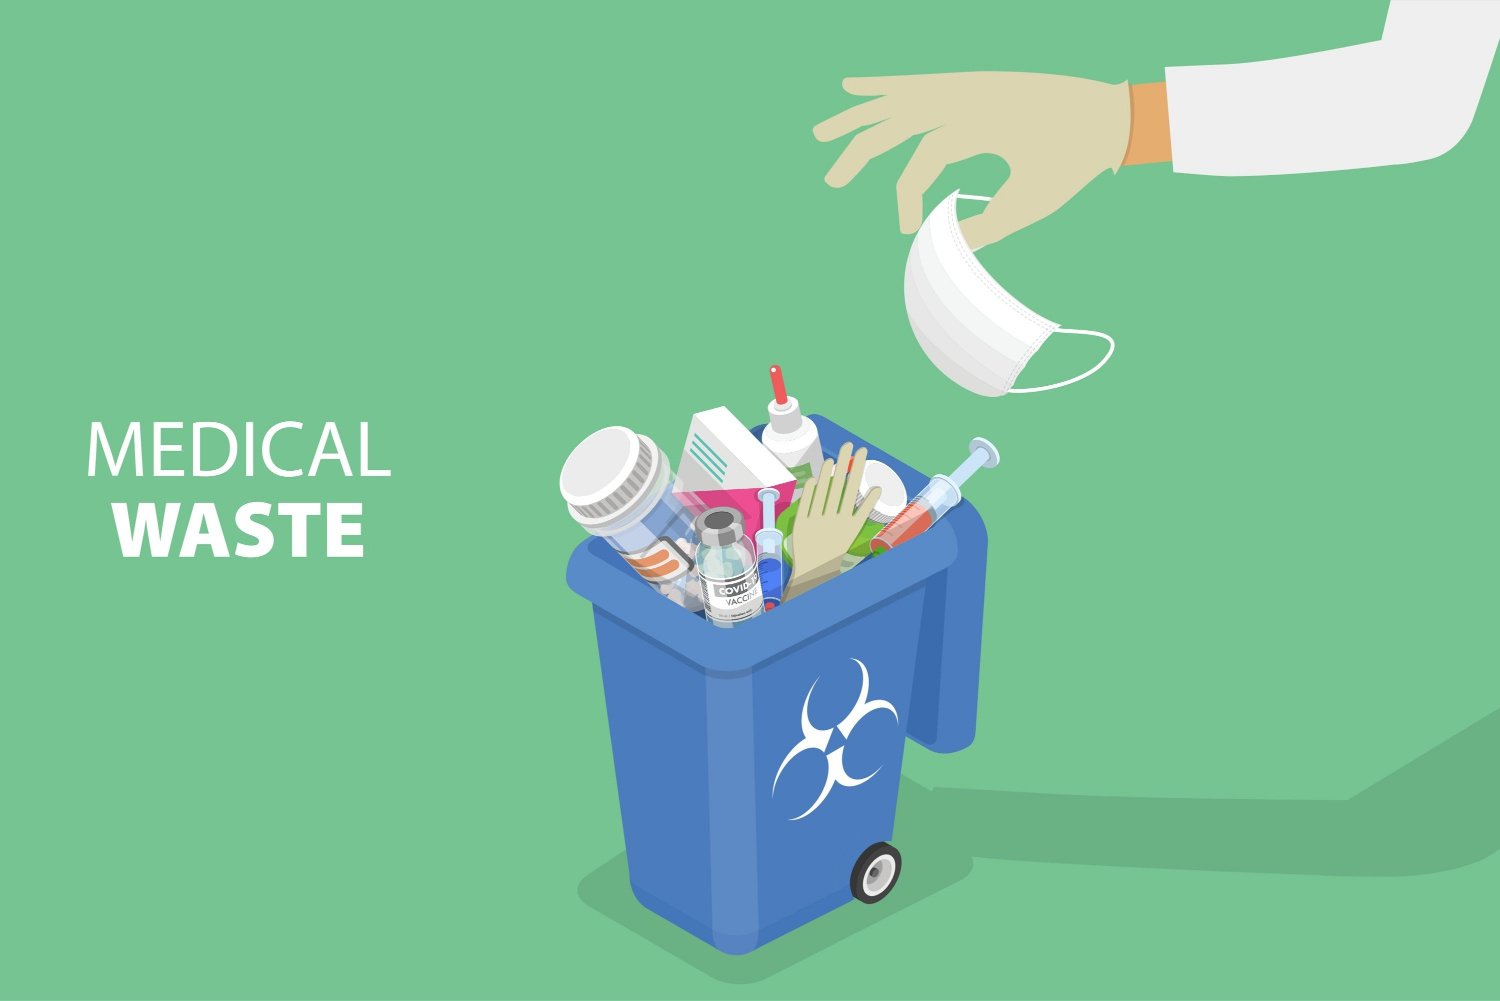 How Is Medical Waste Causing Environmental And Public Health Concerns